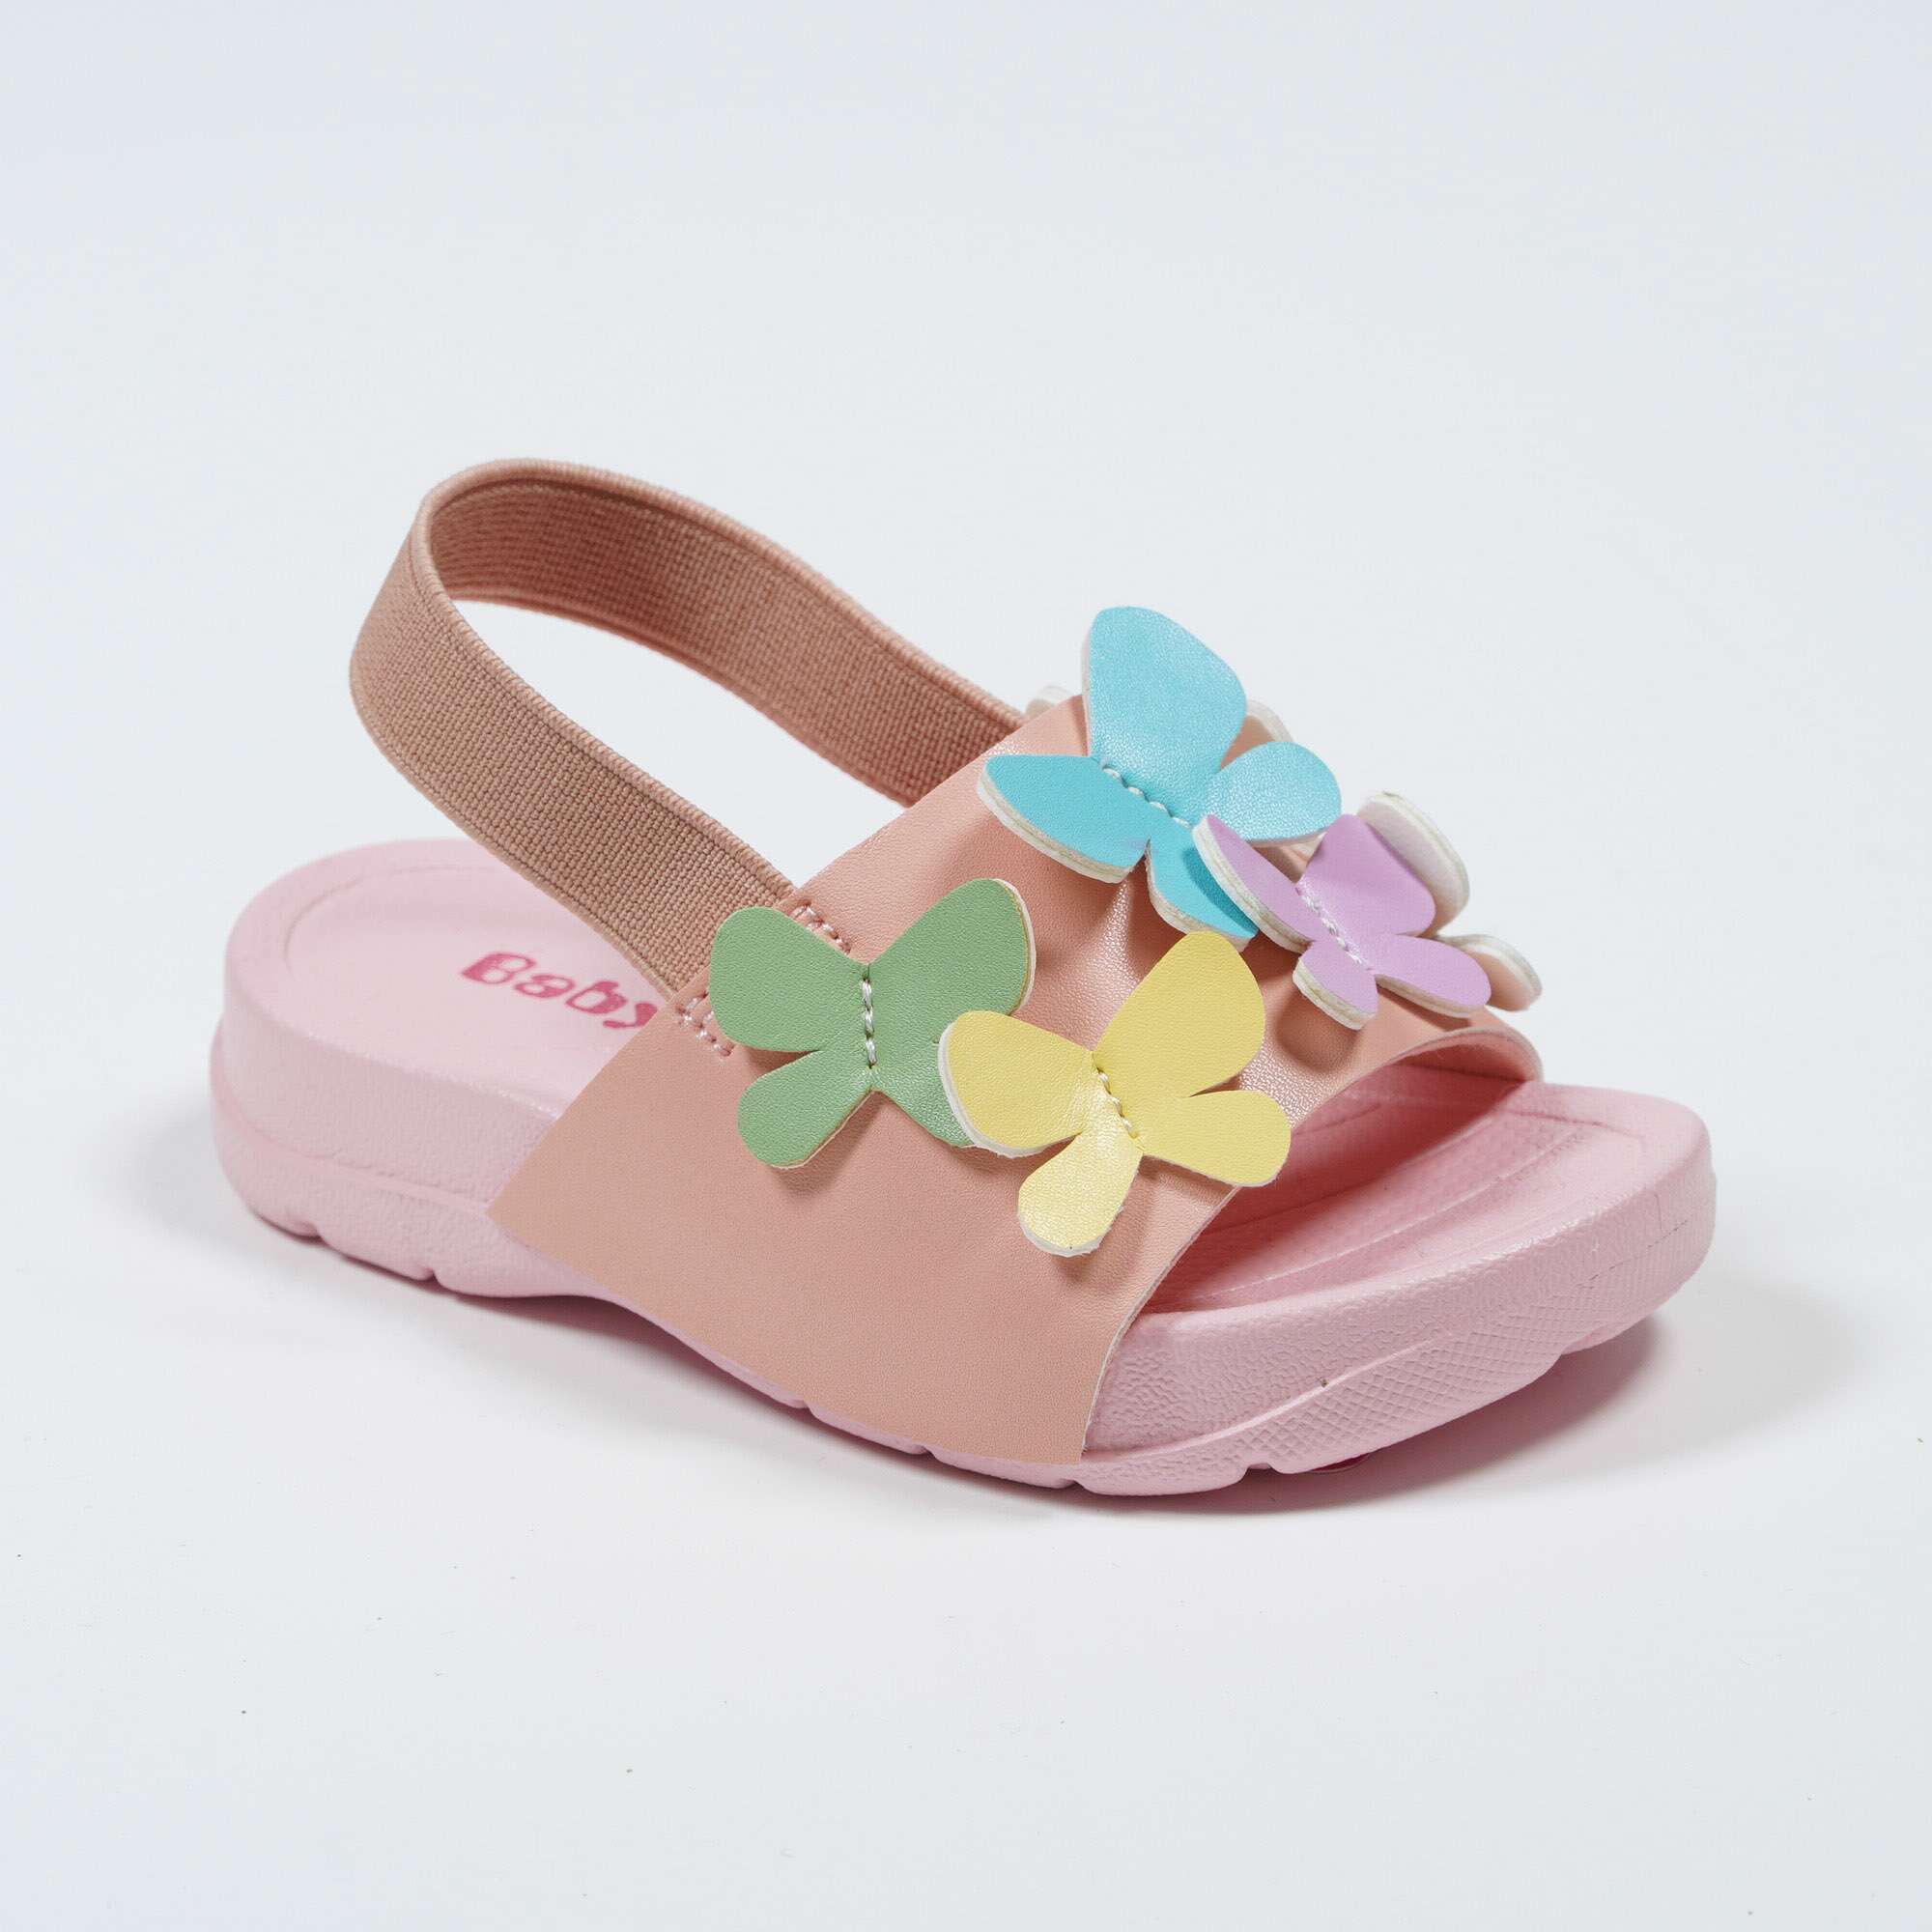 Nikoofly-Colorful-Butterfly-Baby-Slipper-Sandals-YDX2311F-3-pink